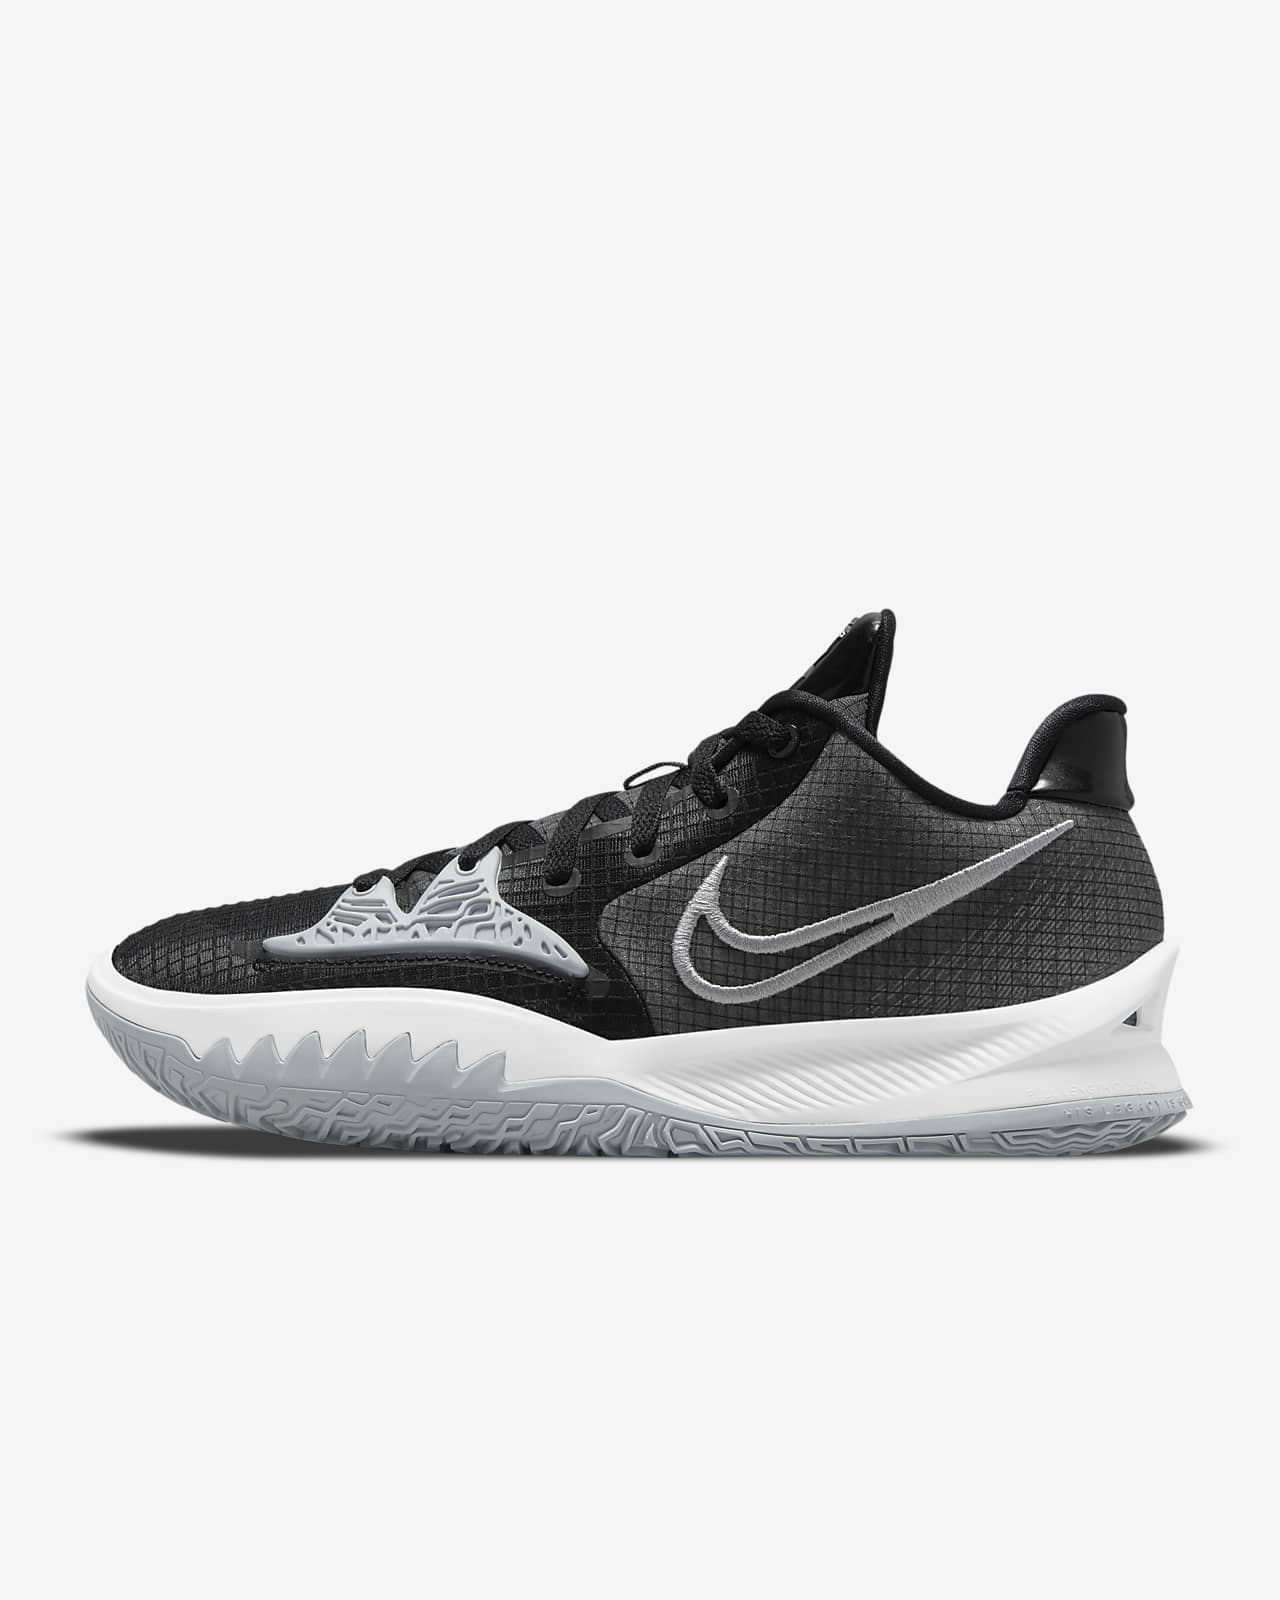 Kyrie Low 4 (Team) Basketball Shoes